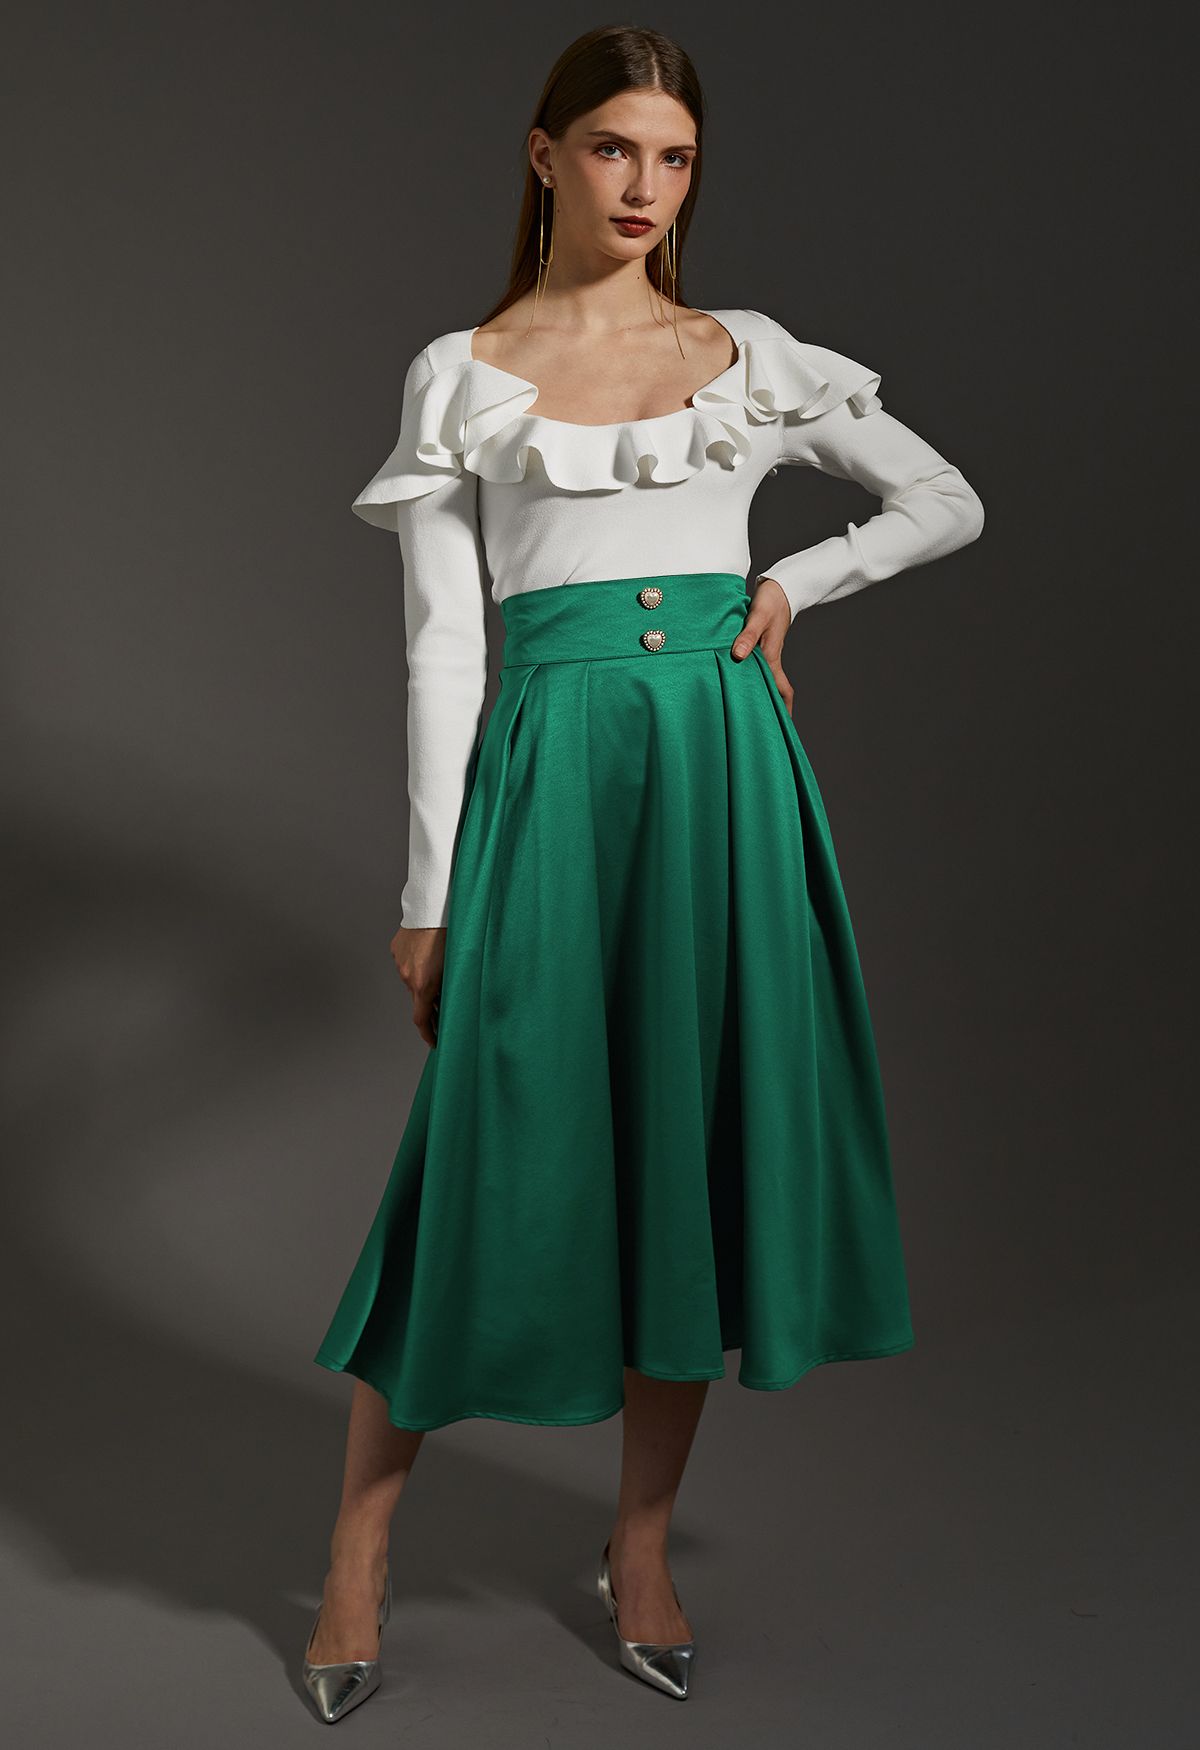 Pearl Heart Buttoned A-Line Midi Skirt in Emerald